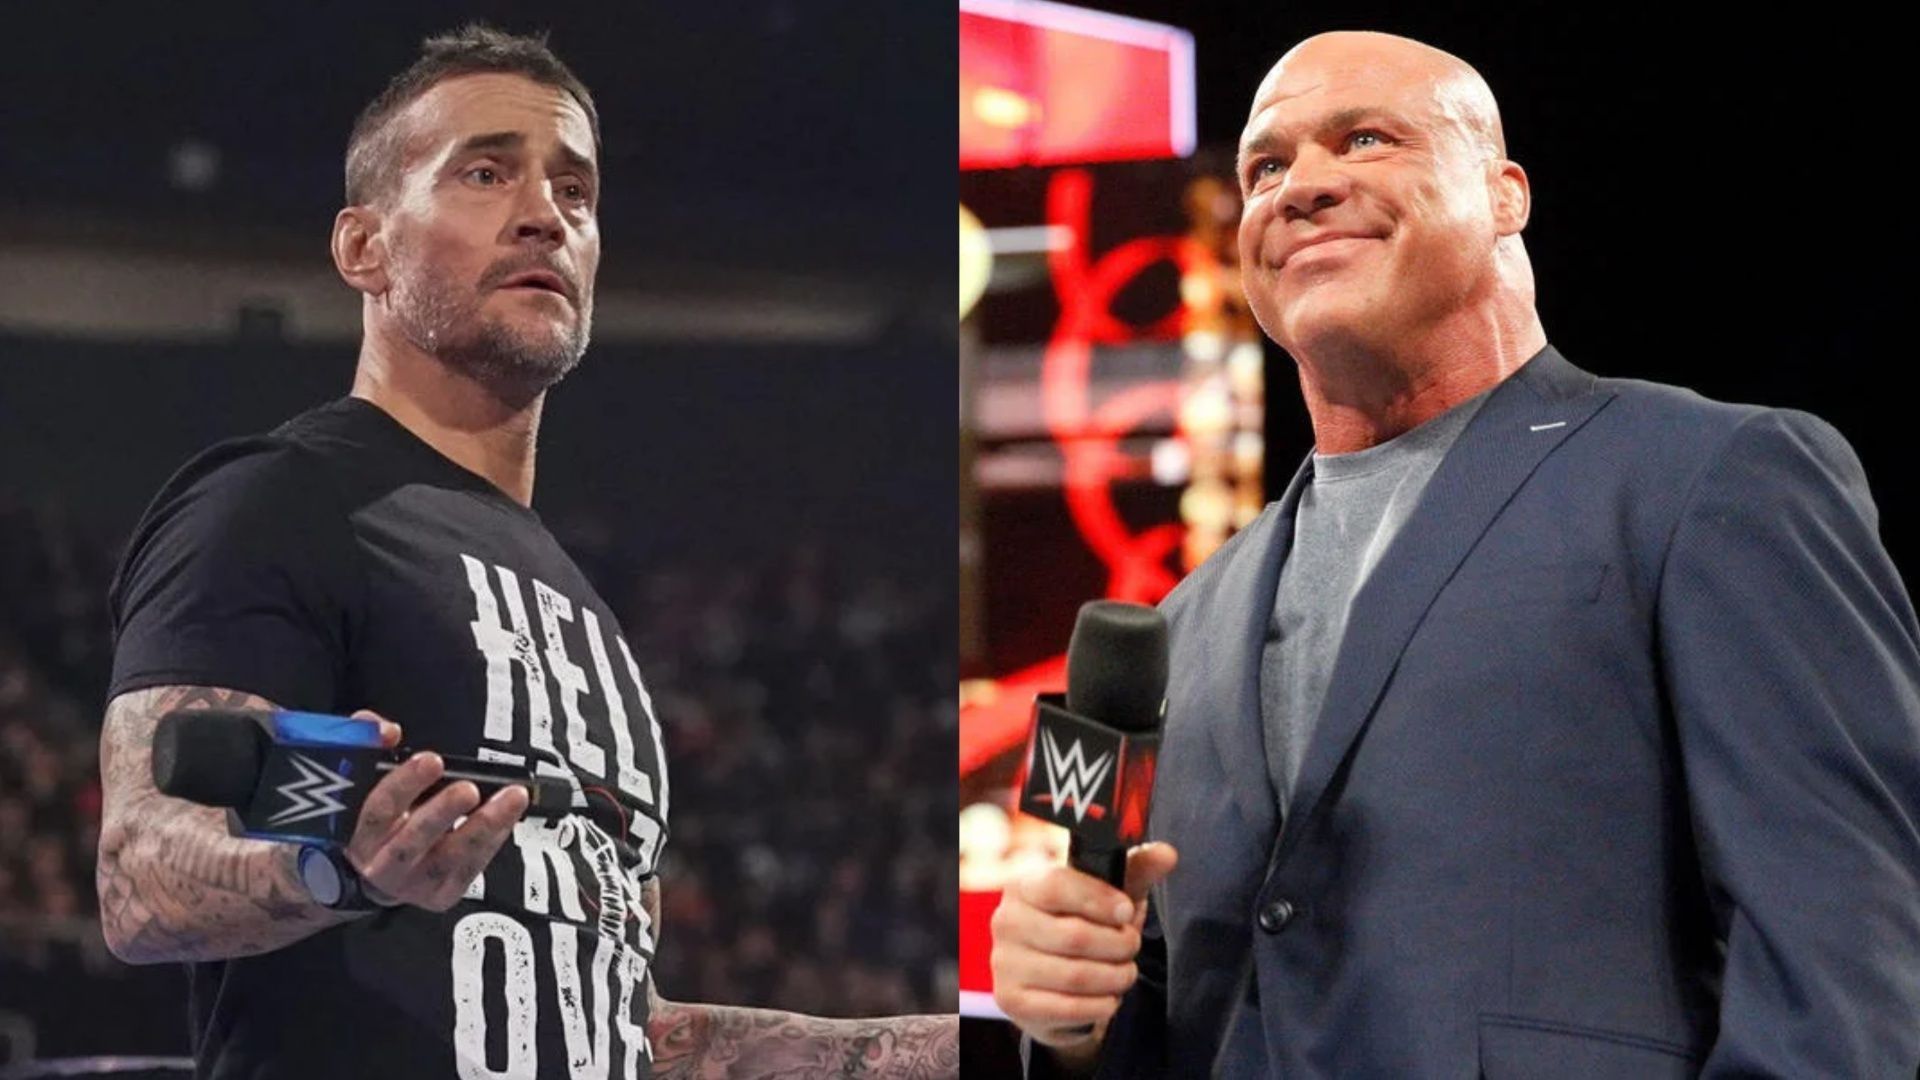 CM Punk might have gotten beaten up by a former WWE superstar, according to Kurt Angle.